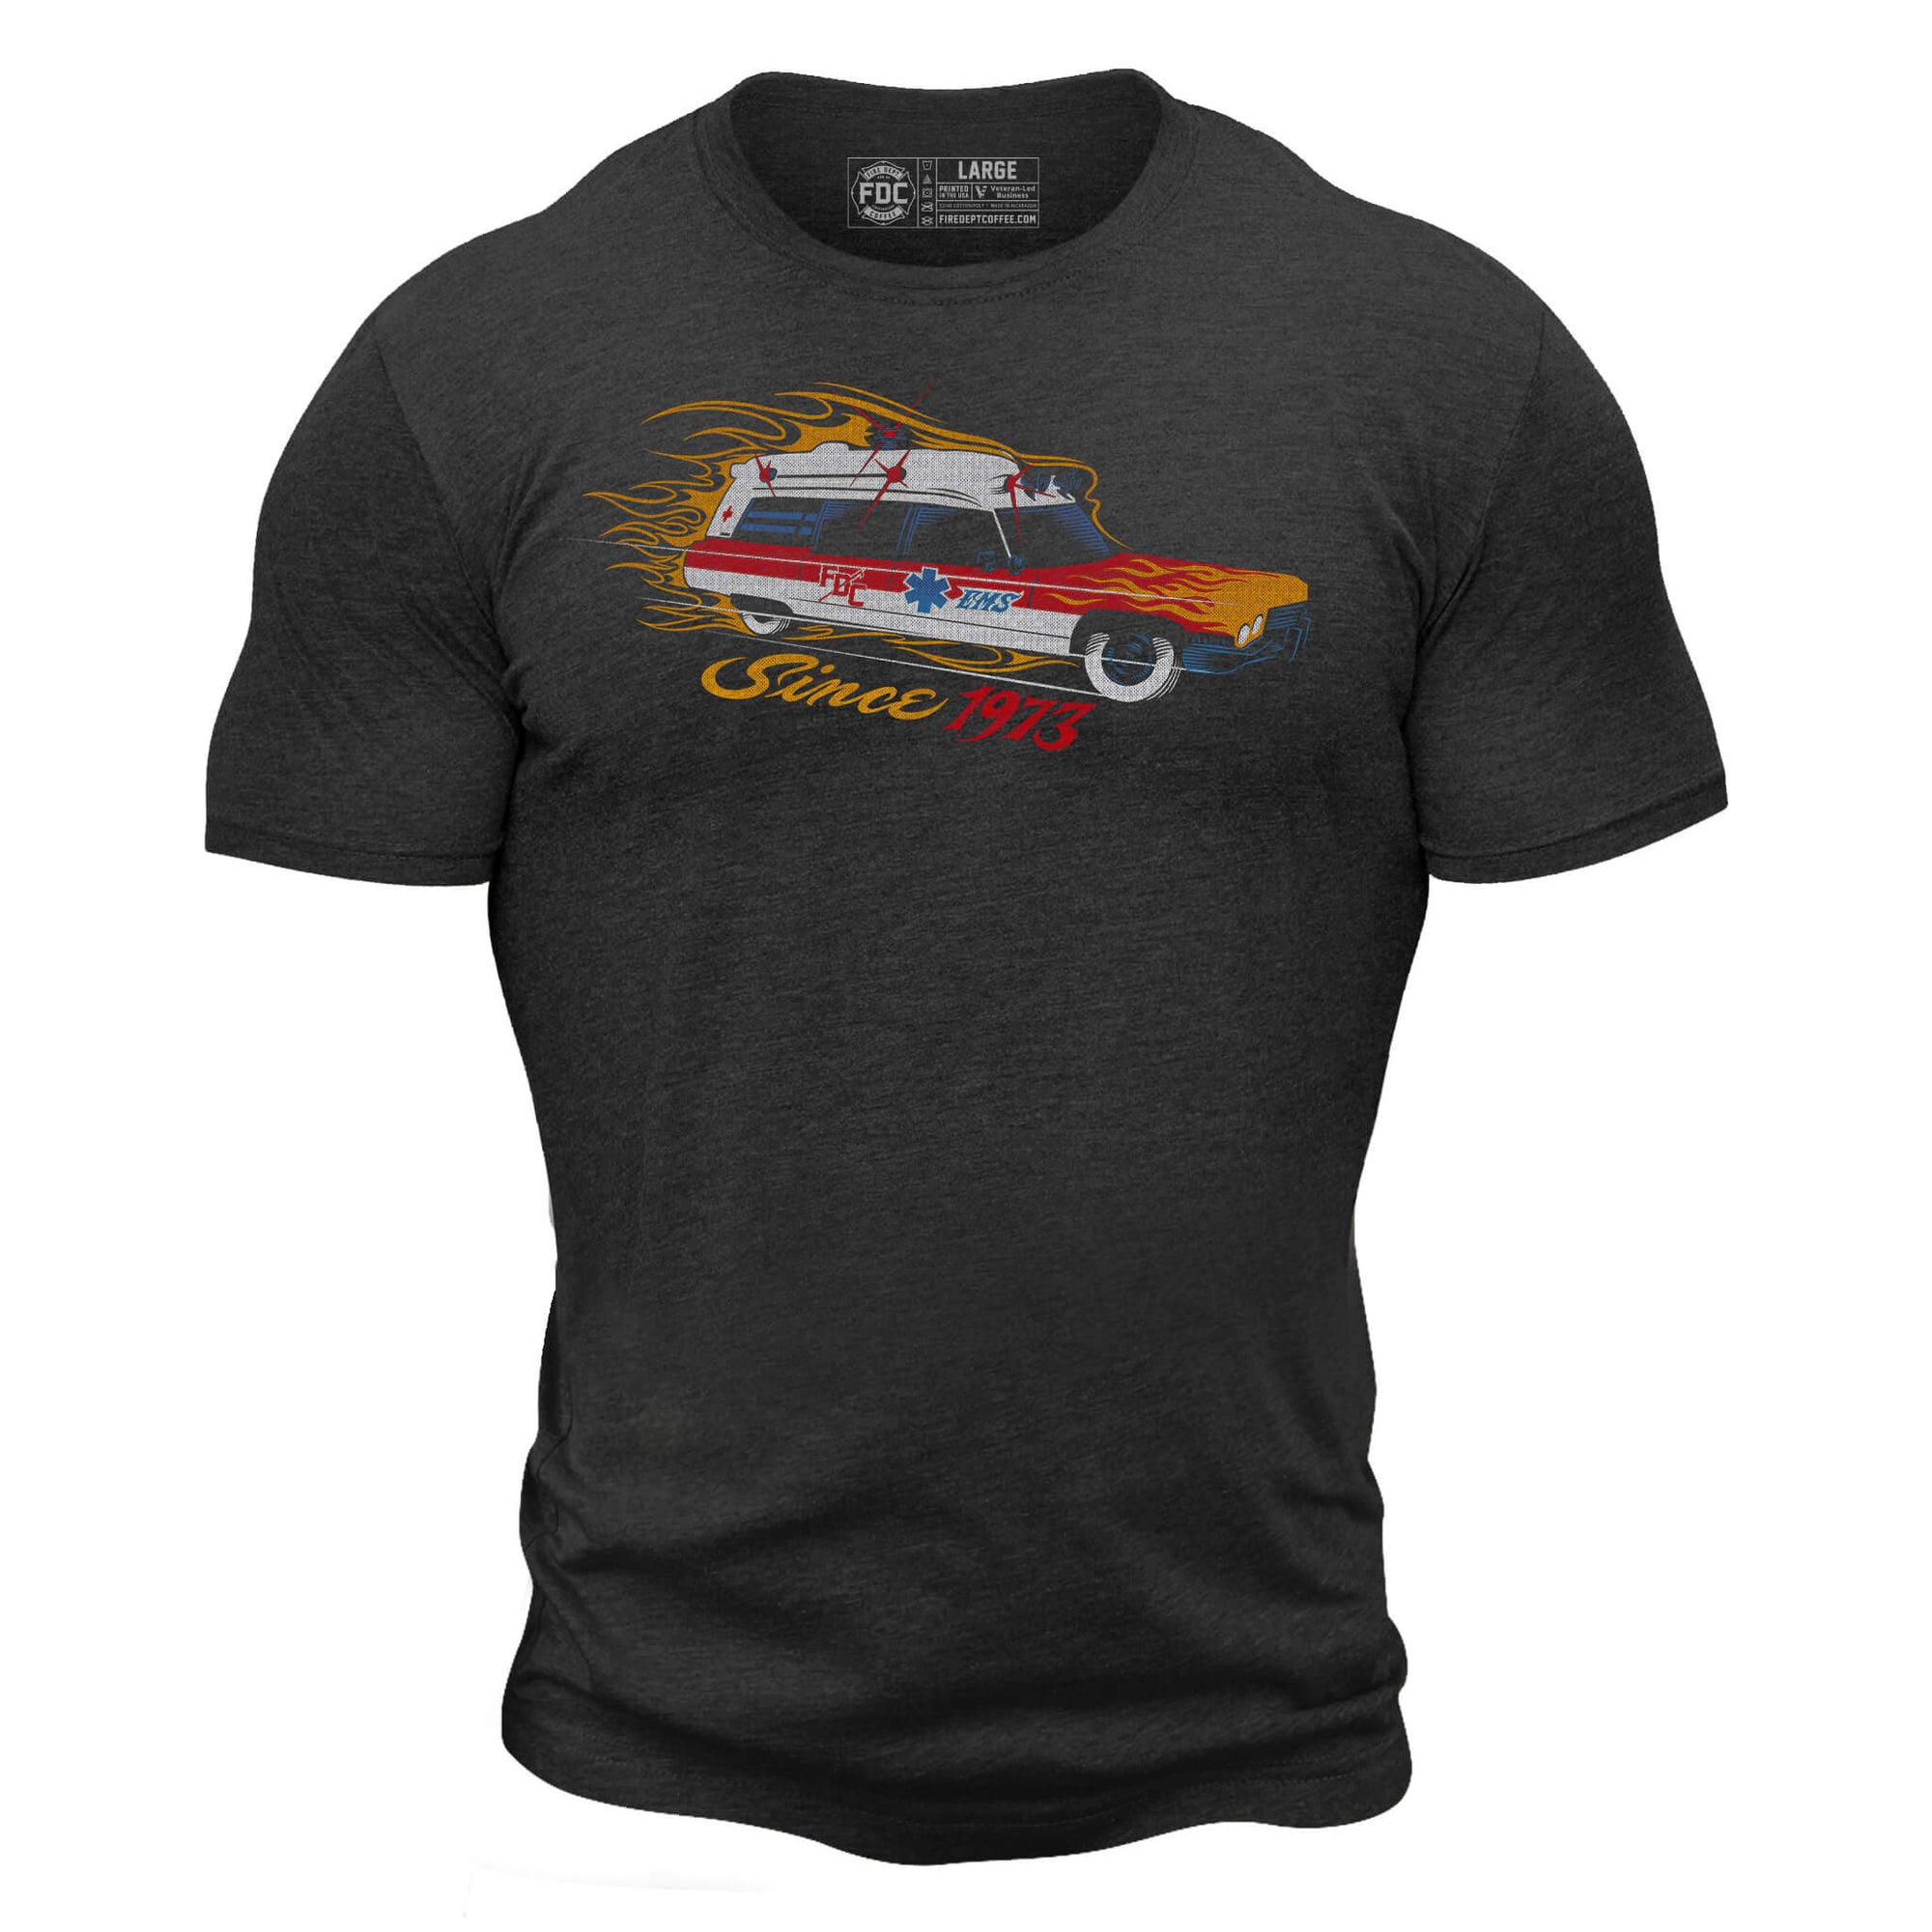 A dark gray t shirt with a "meat wagon" vehicle on the chest surrounded by flames. Under the vehicle it says "since 1973".